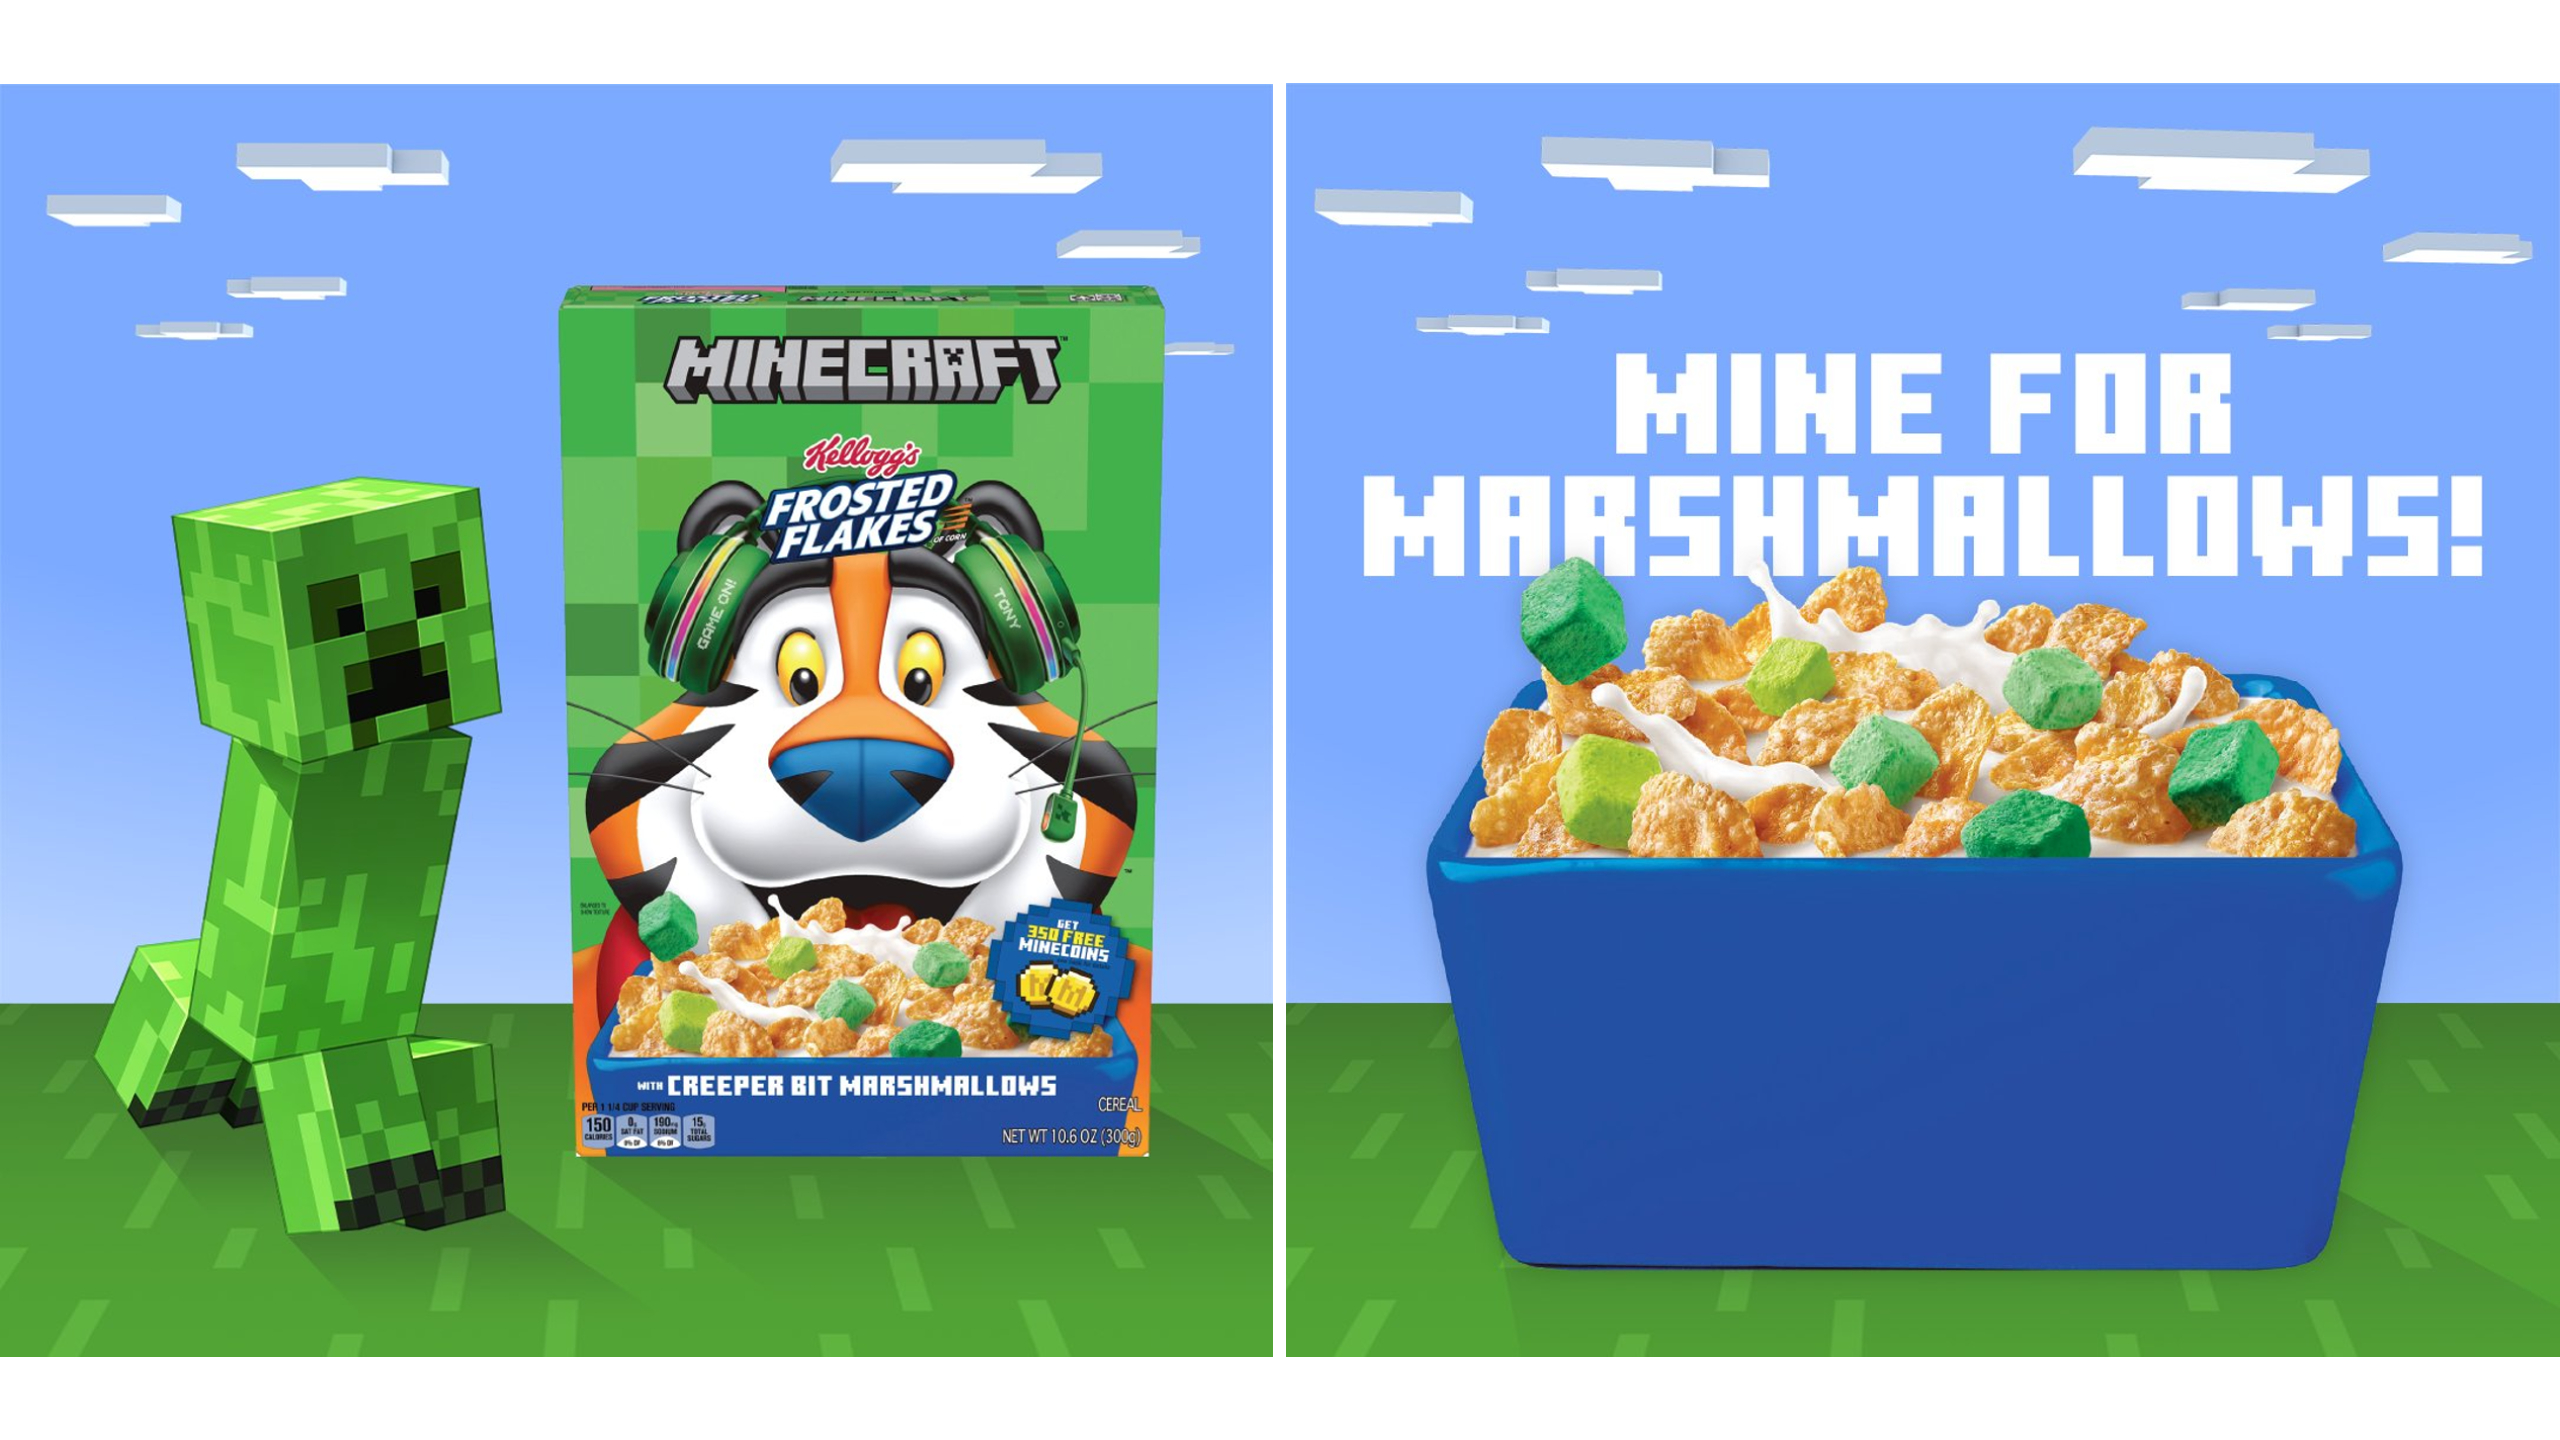 New Minecraft Kellogg's Frosted Flakes Cereal w/ Creeper Bit Marshmallows